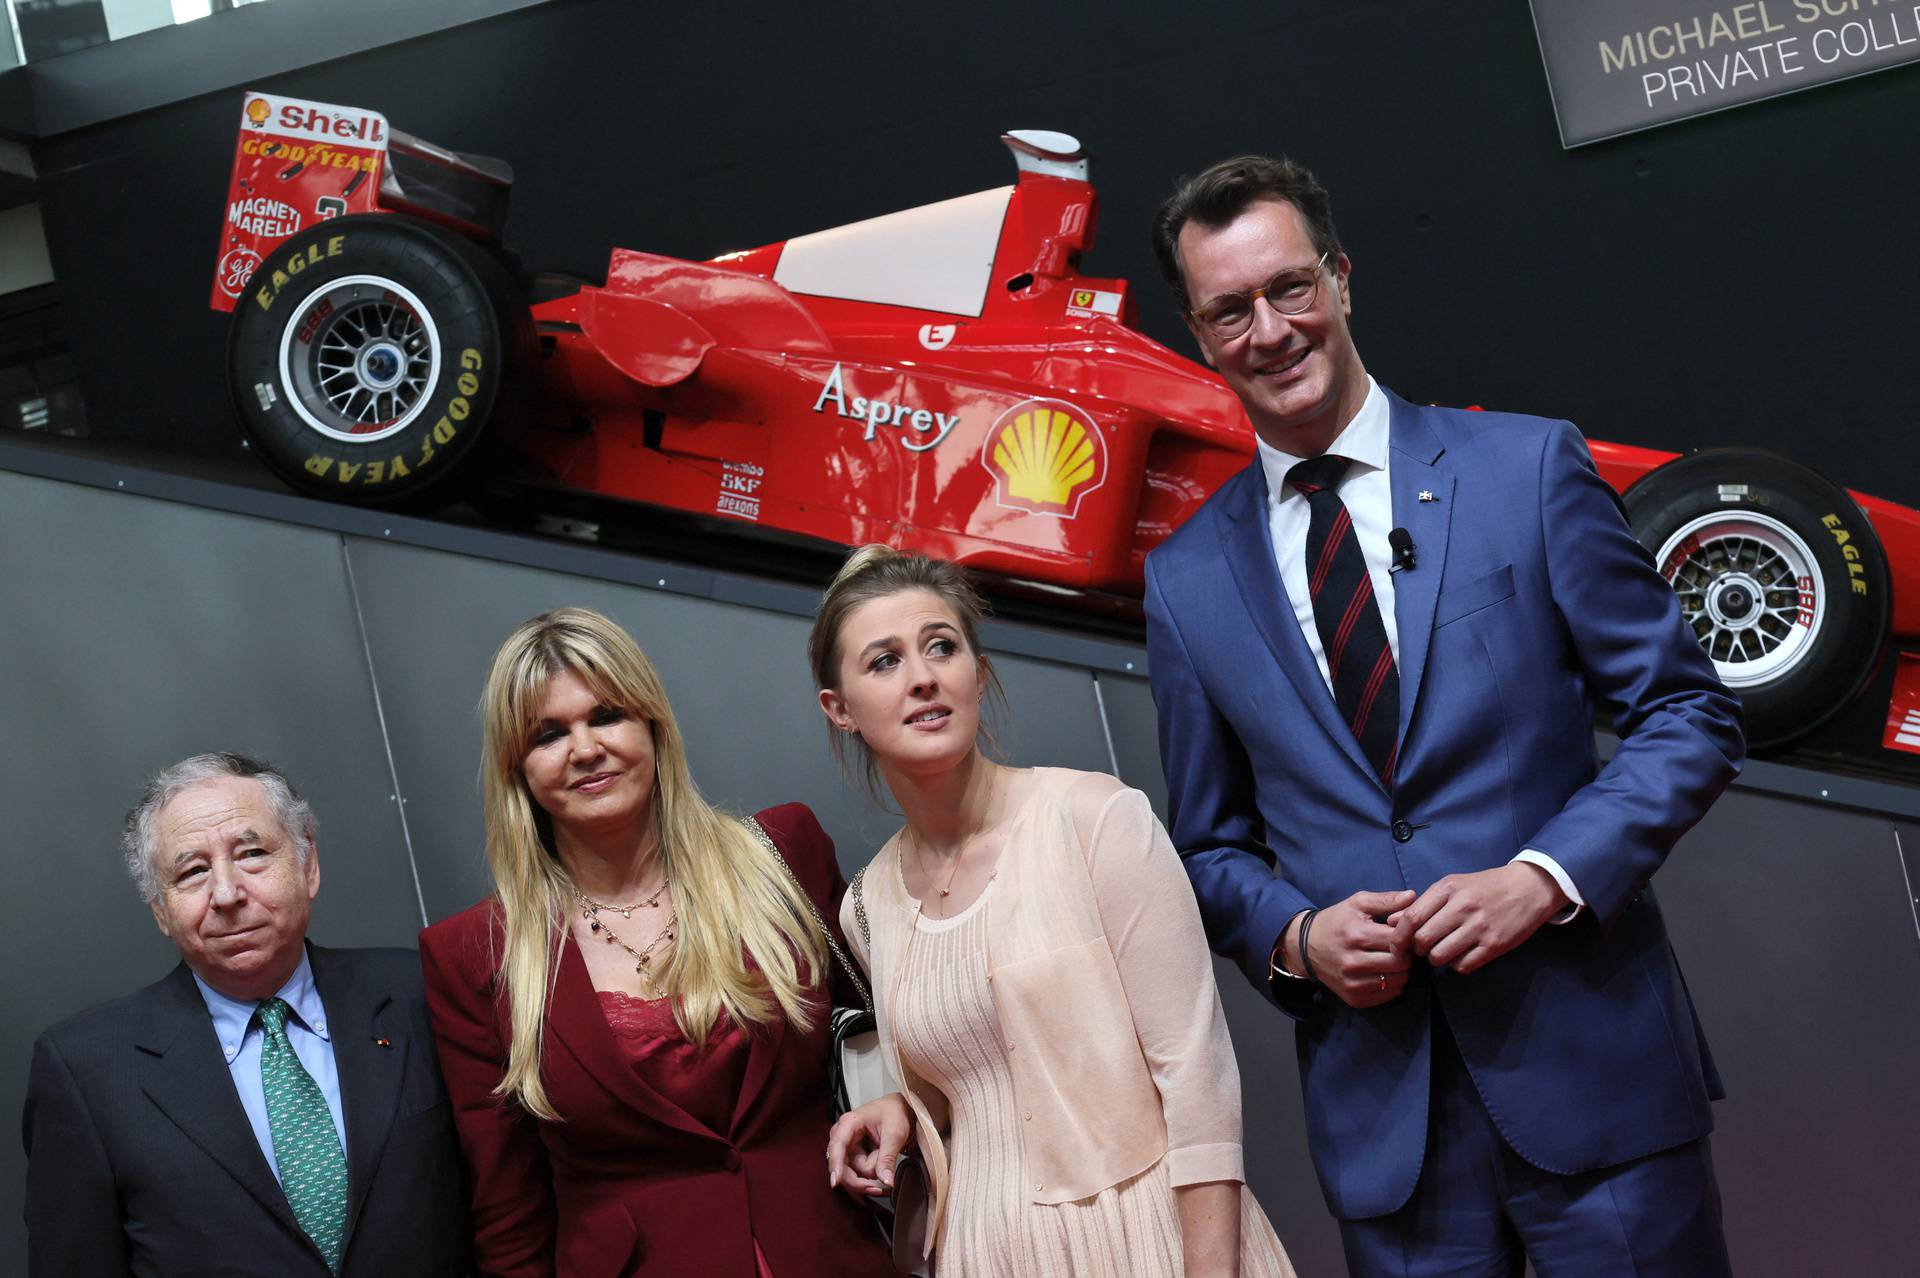 NRW state prize for former F-1 world champion Michael Schumacher in Cologne